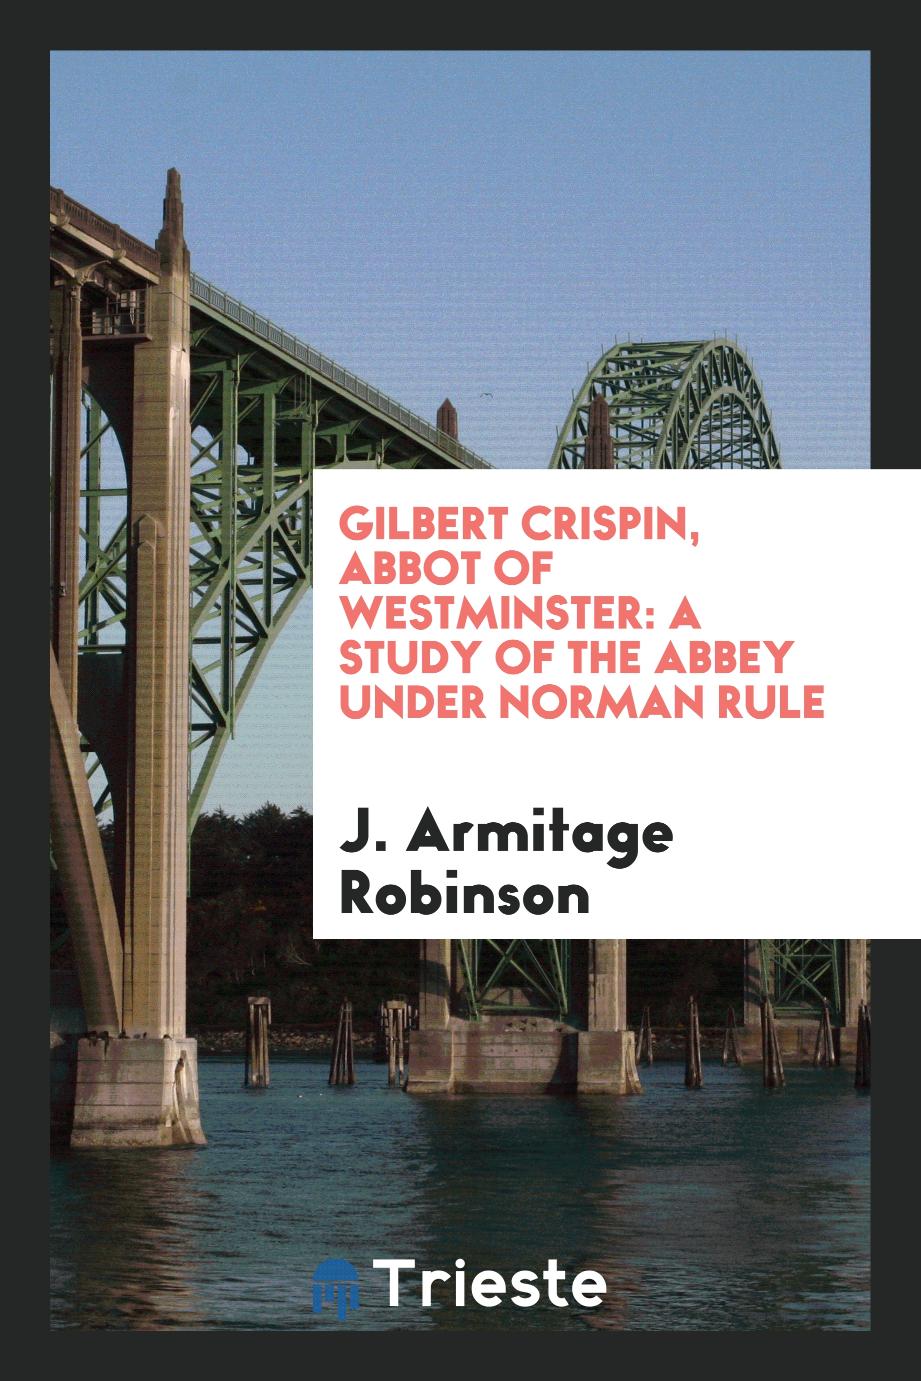 Gilbert Crispin, abbot of Westminster: a study of the abbey under Norman rule